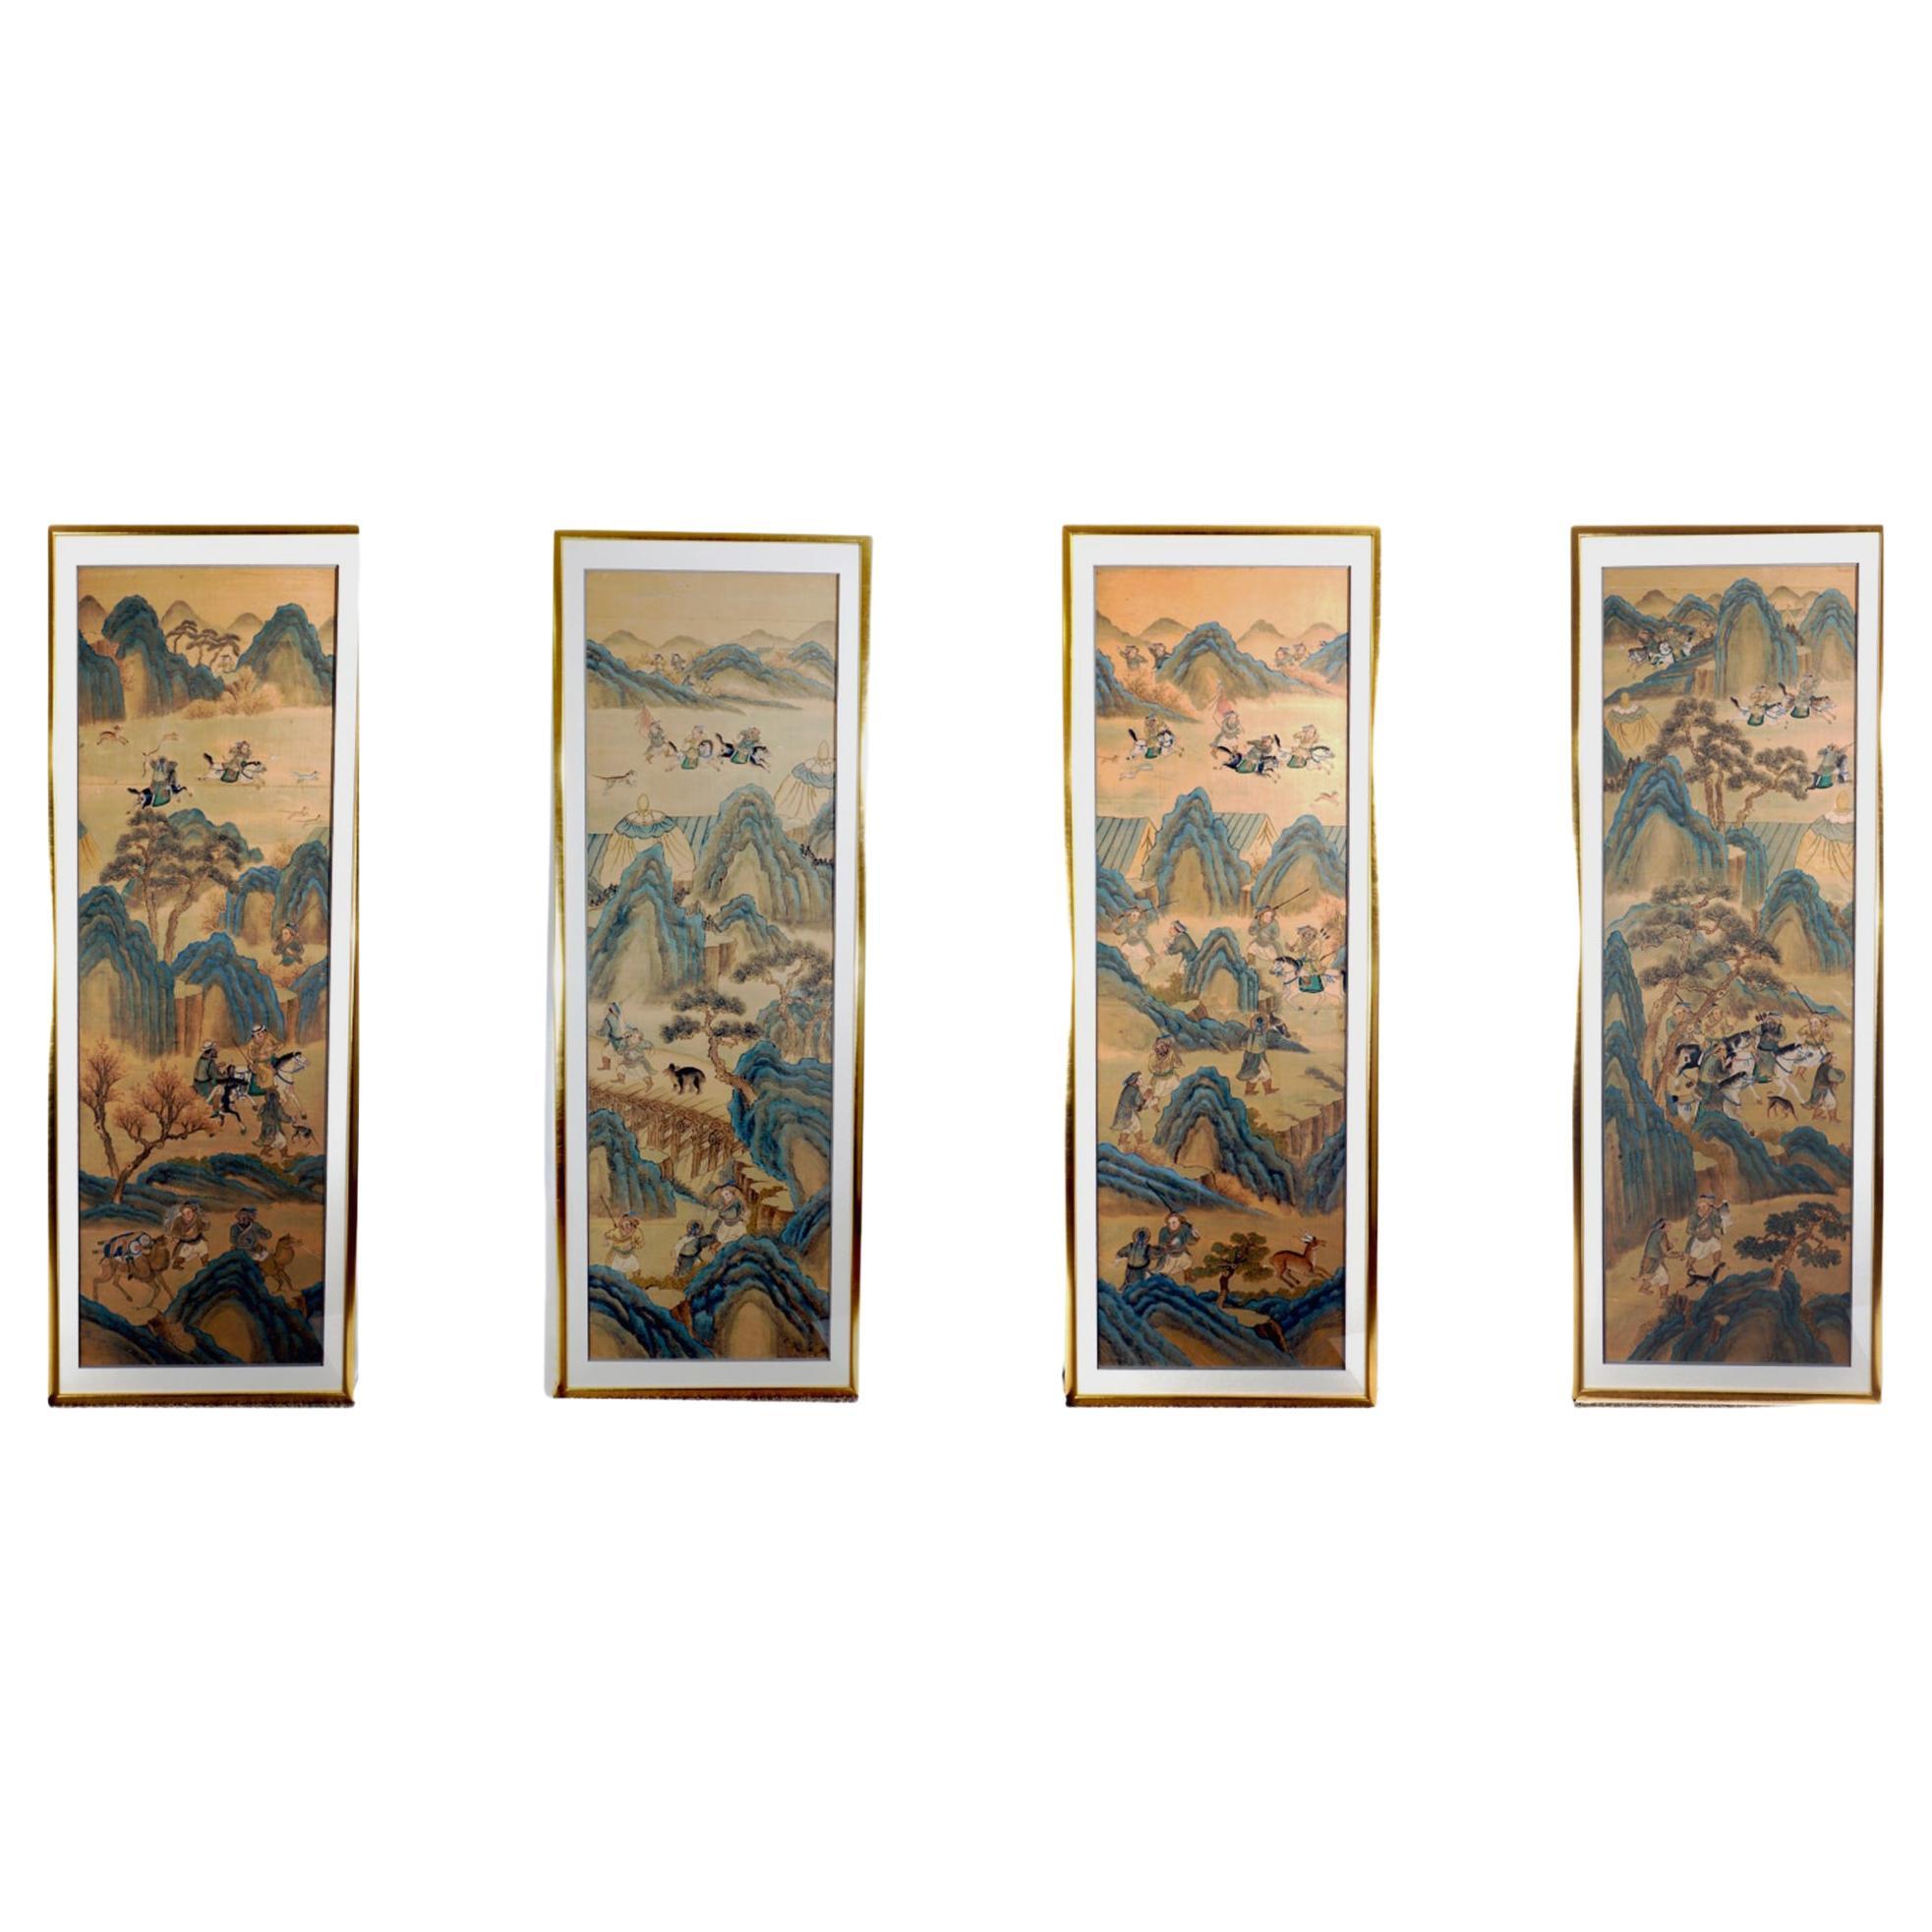 Four Large Chinese Ink Paintings on Silk with Huntsmen